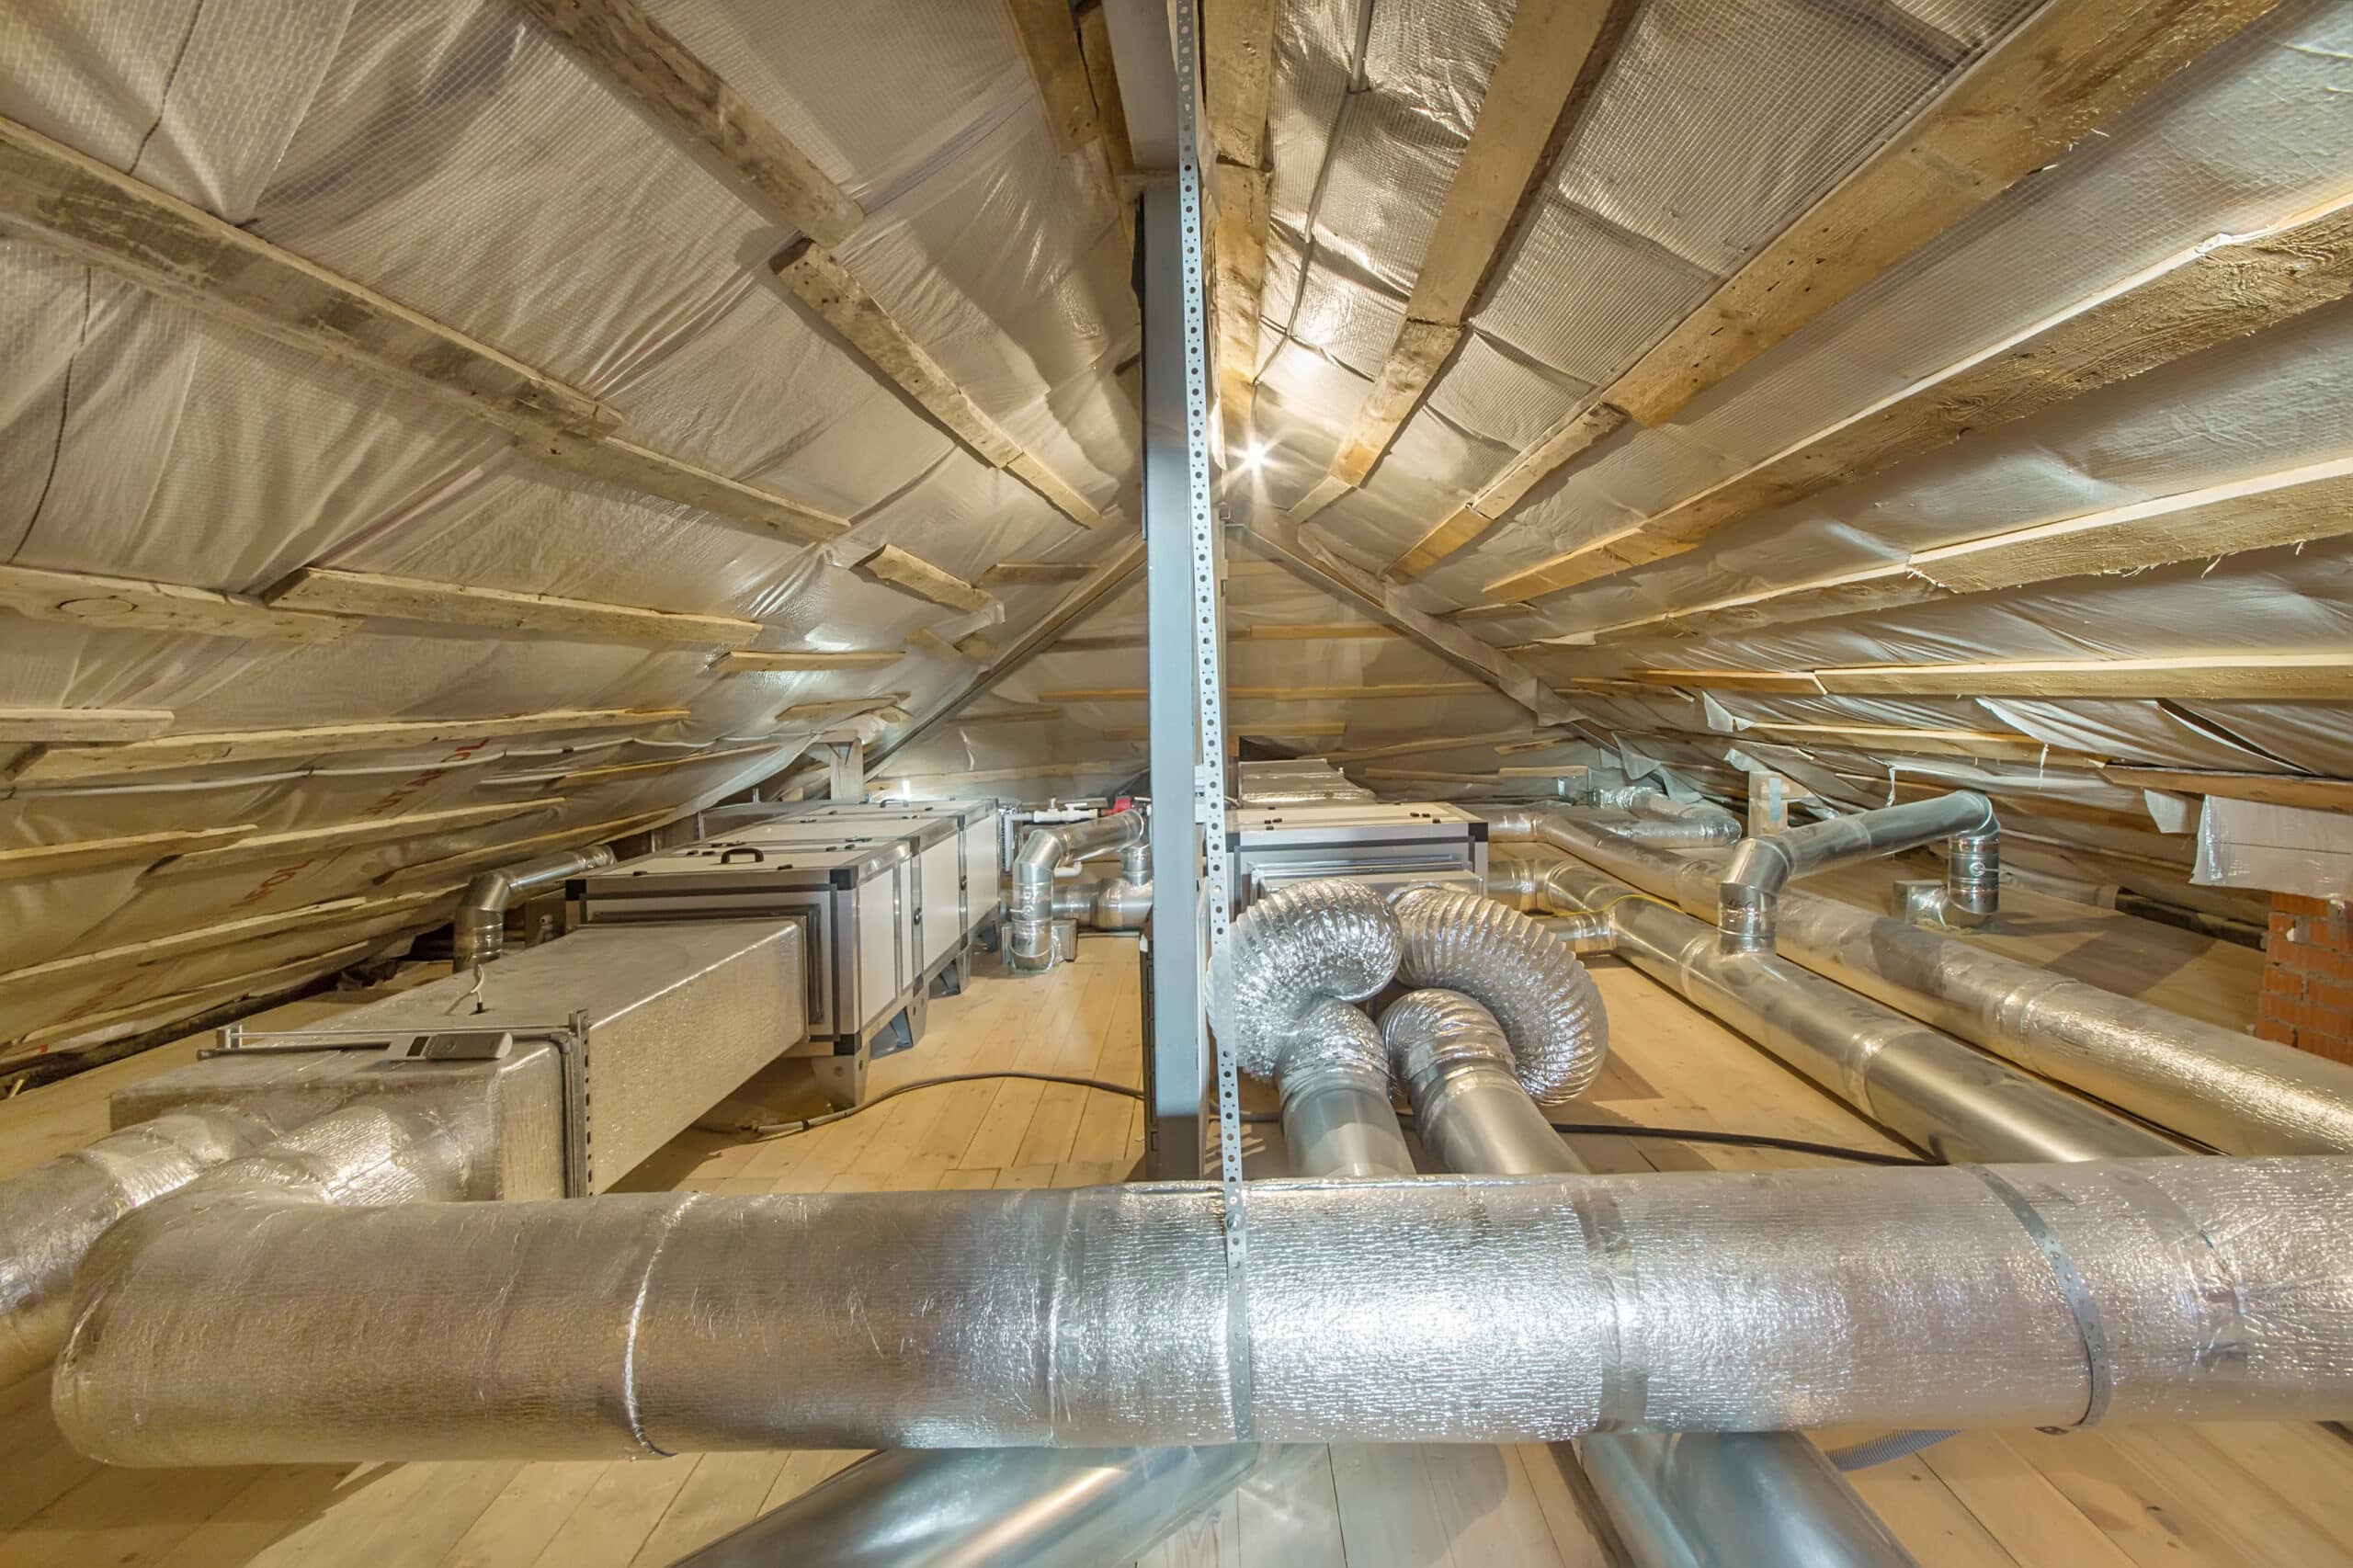 How to Insulate Attic Pipes